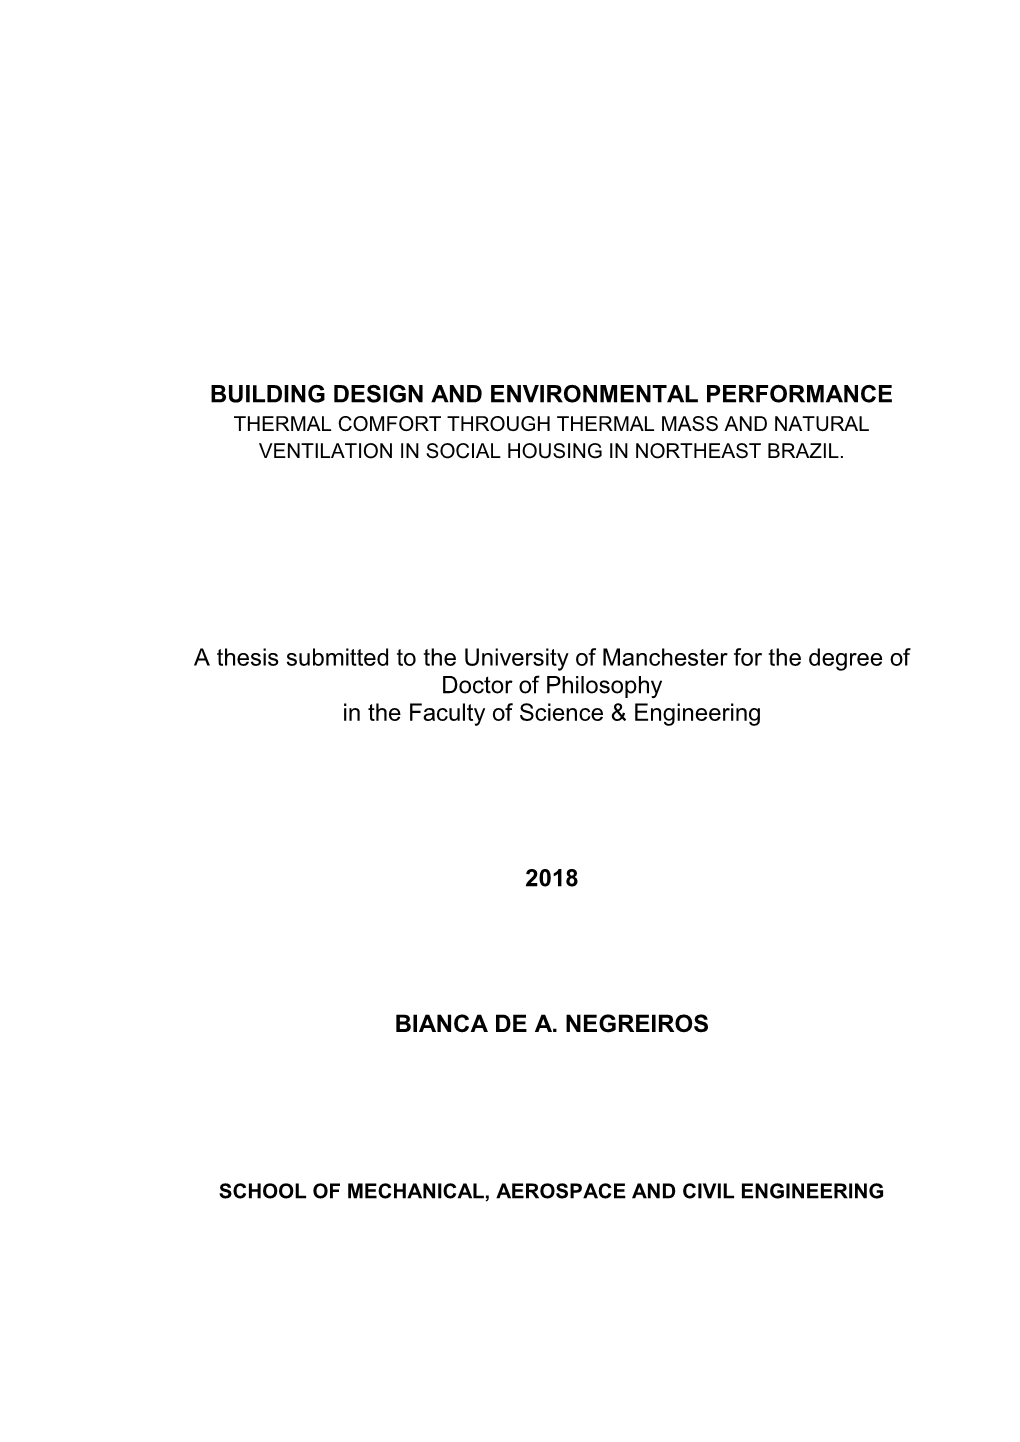 Building Design and Environmental Performance Thermal Comfort Through Thermal Mass and Natural Ventilation in Social Housing in Northeast Brazil